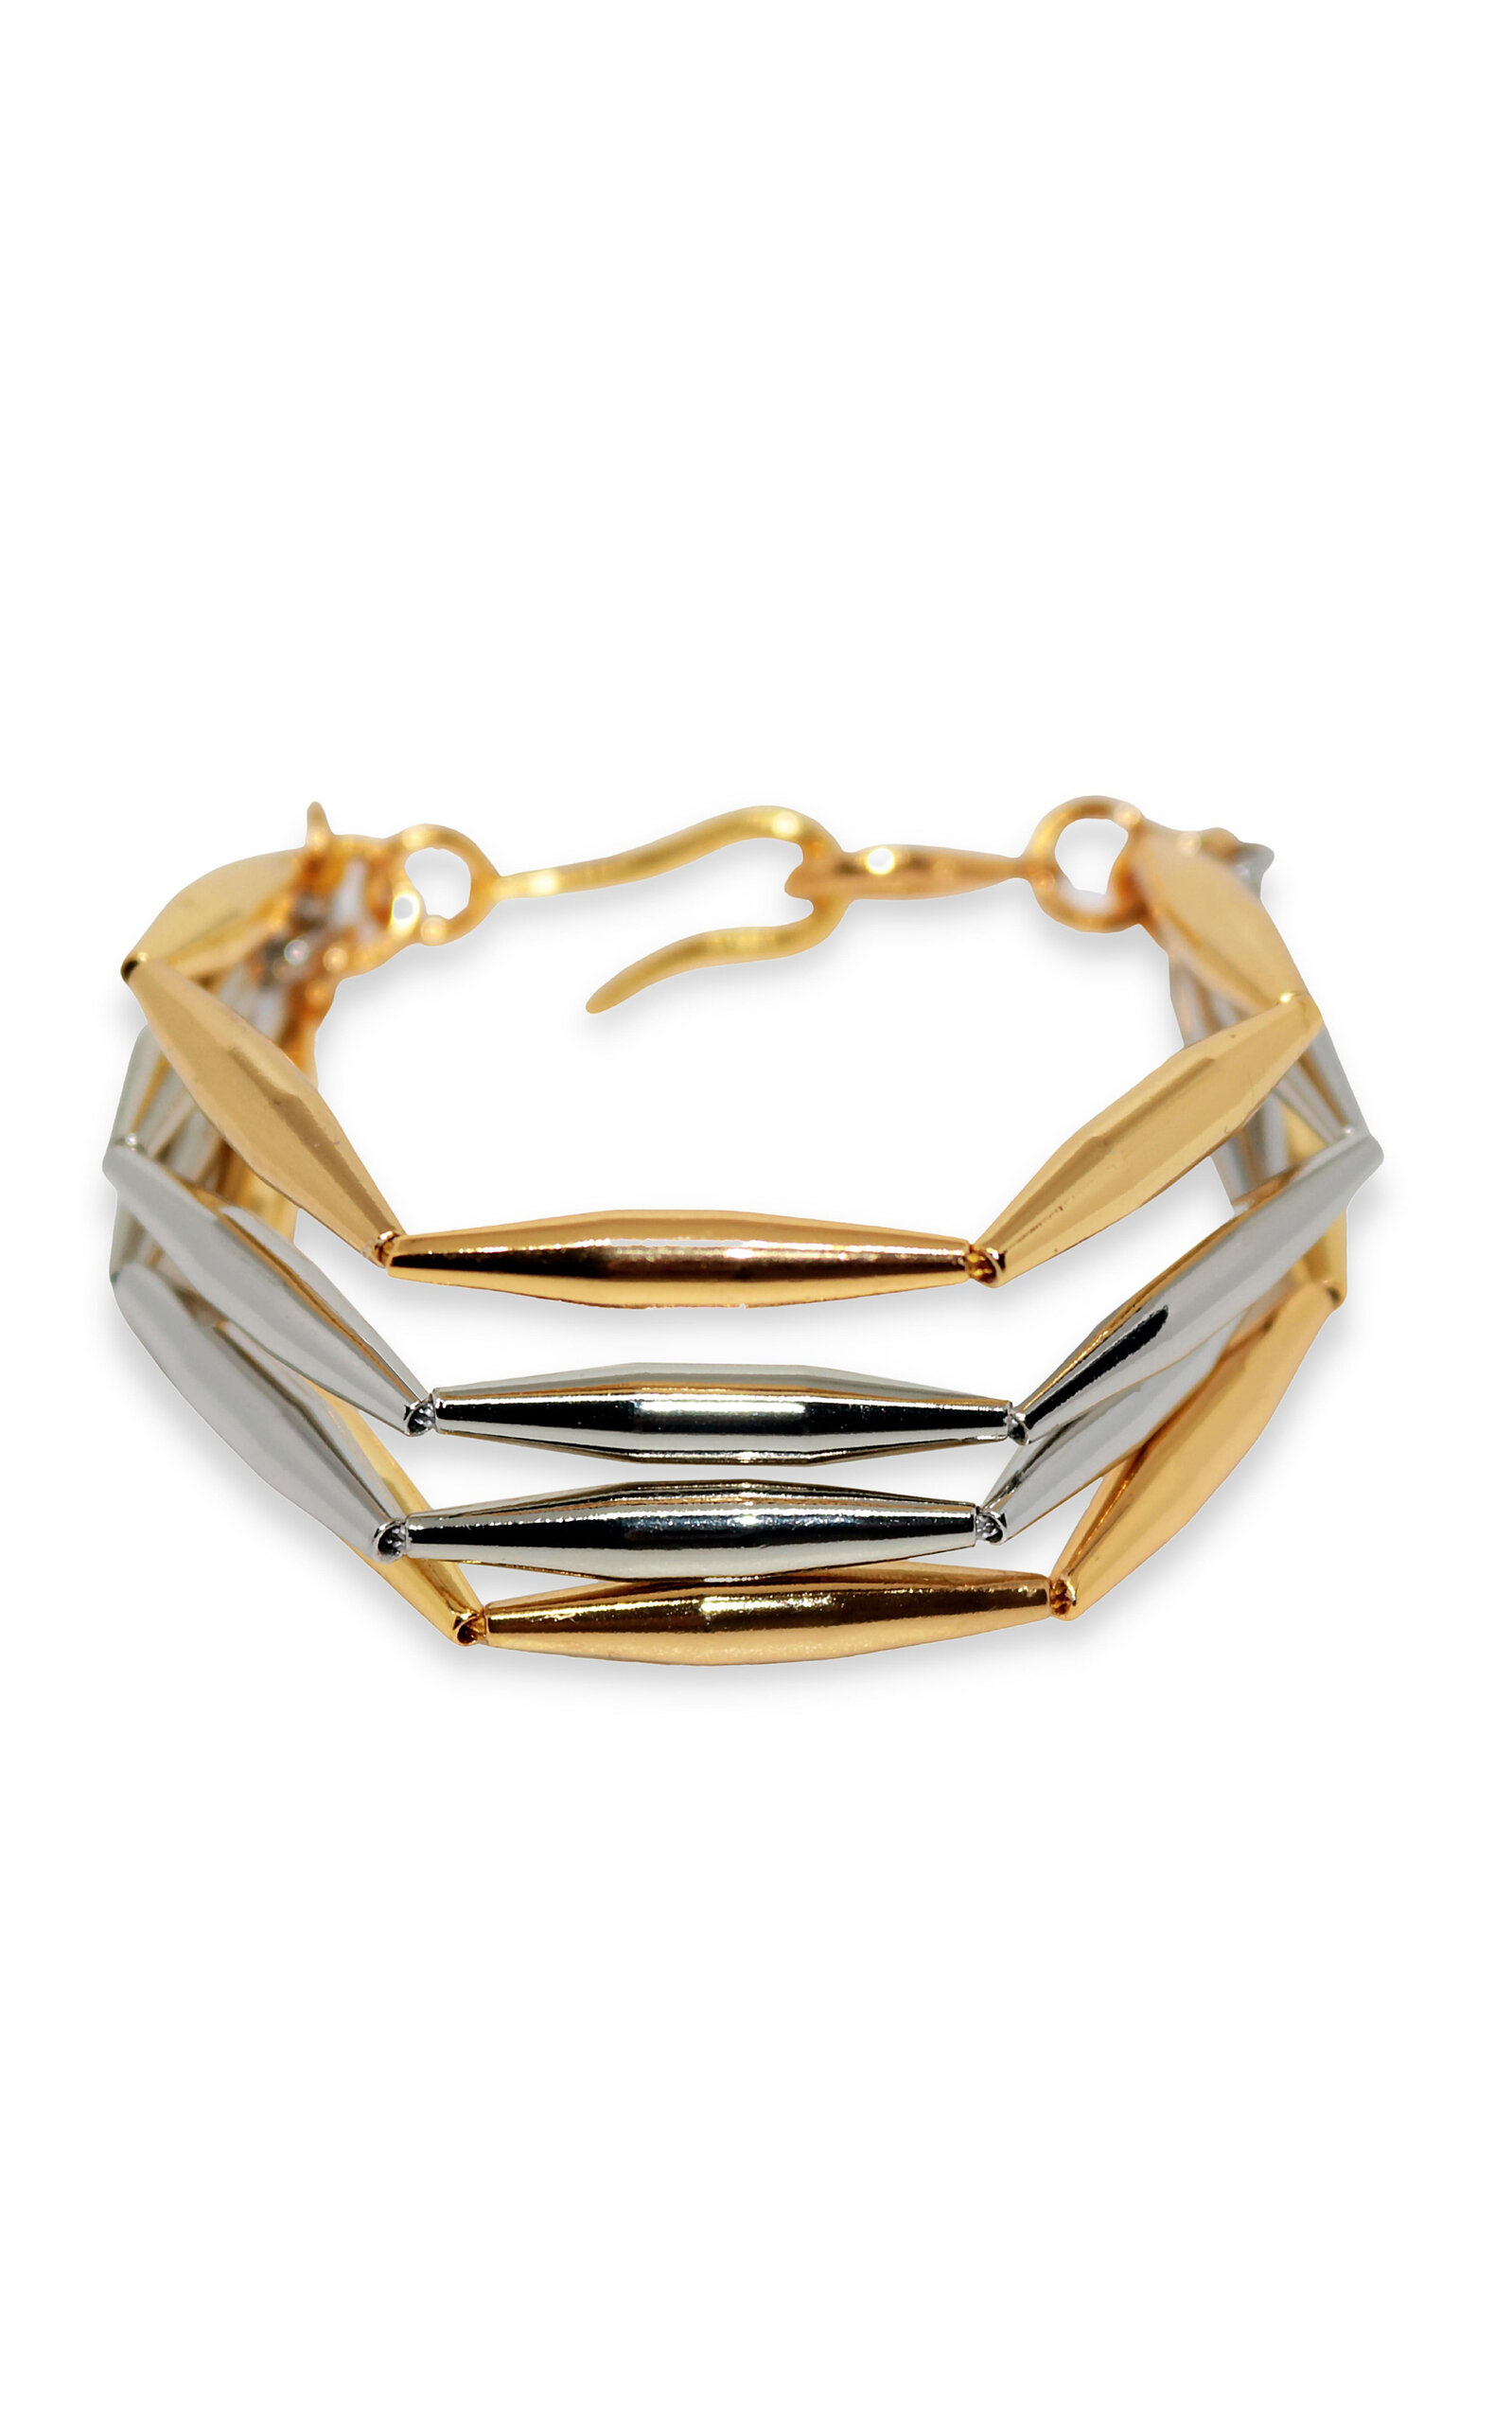 Lumia Maia 24k Gold and 925 Silver-Plated Bracelet